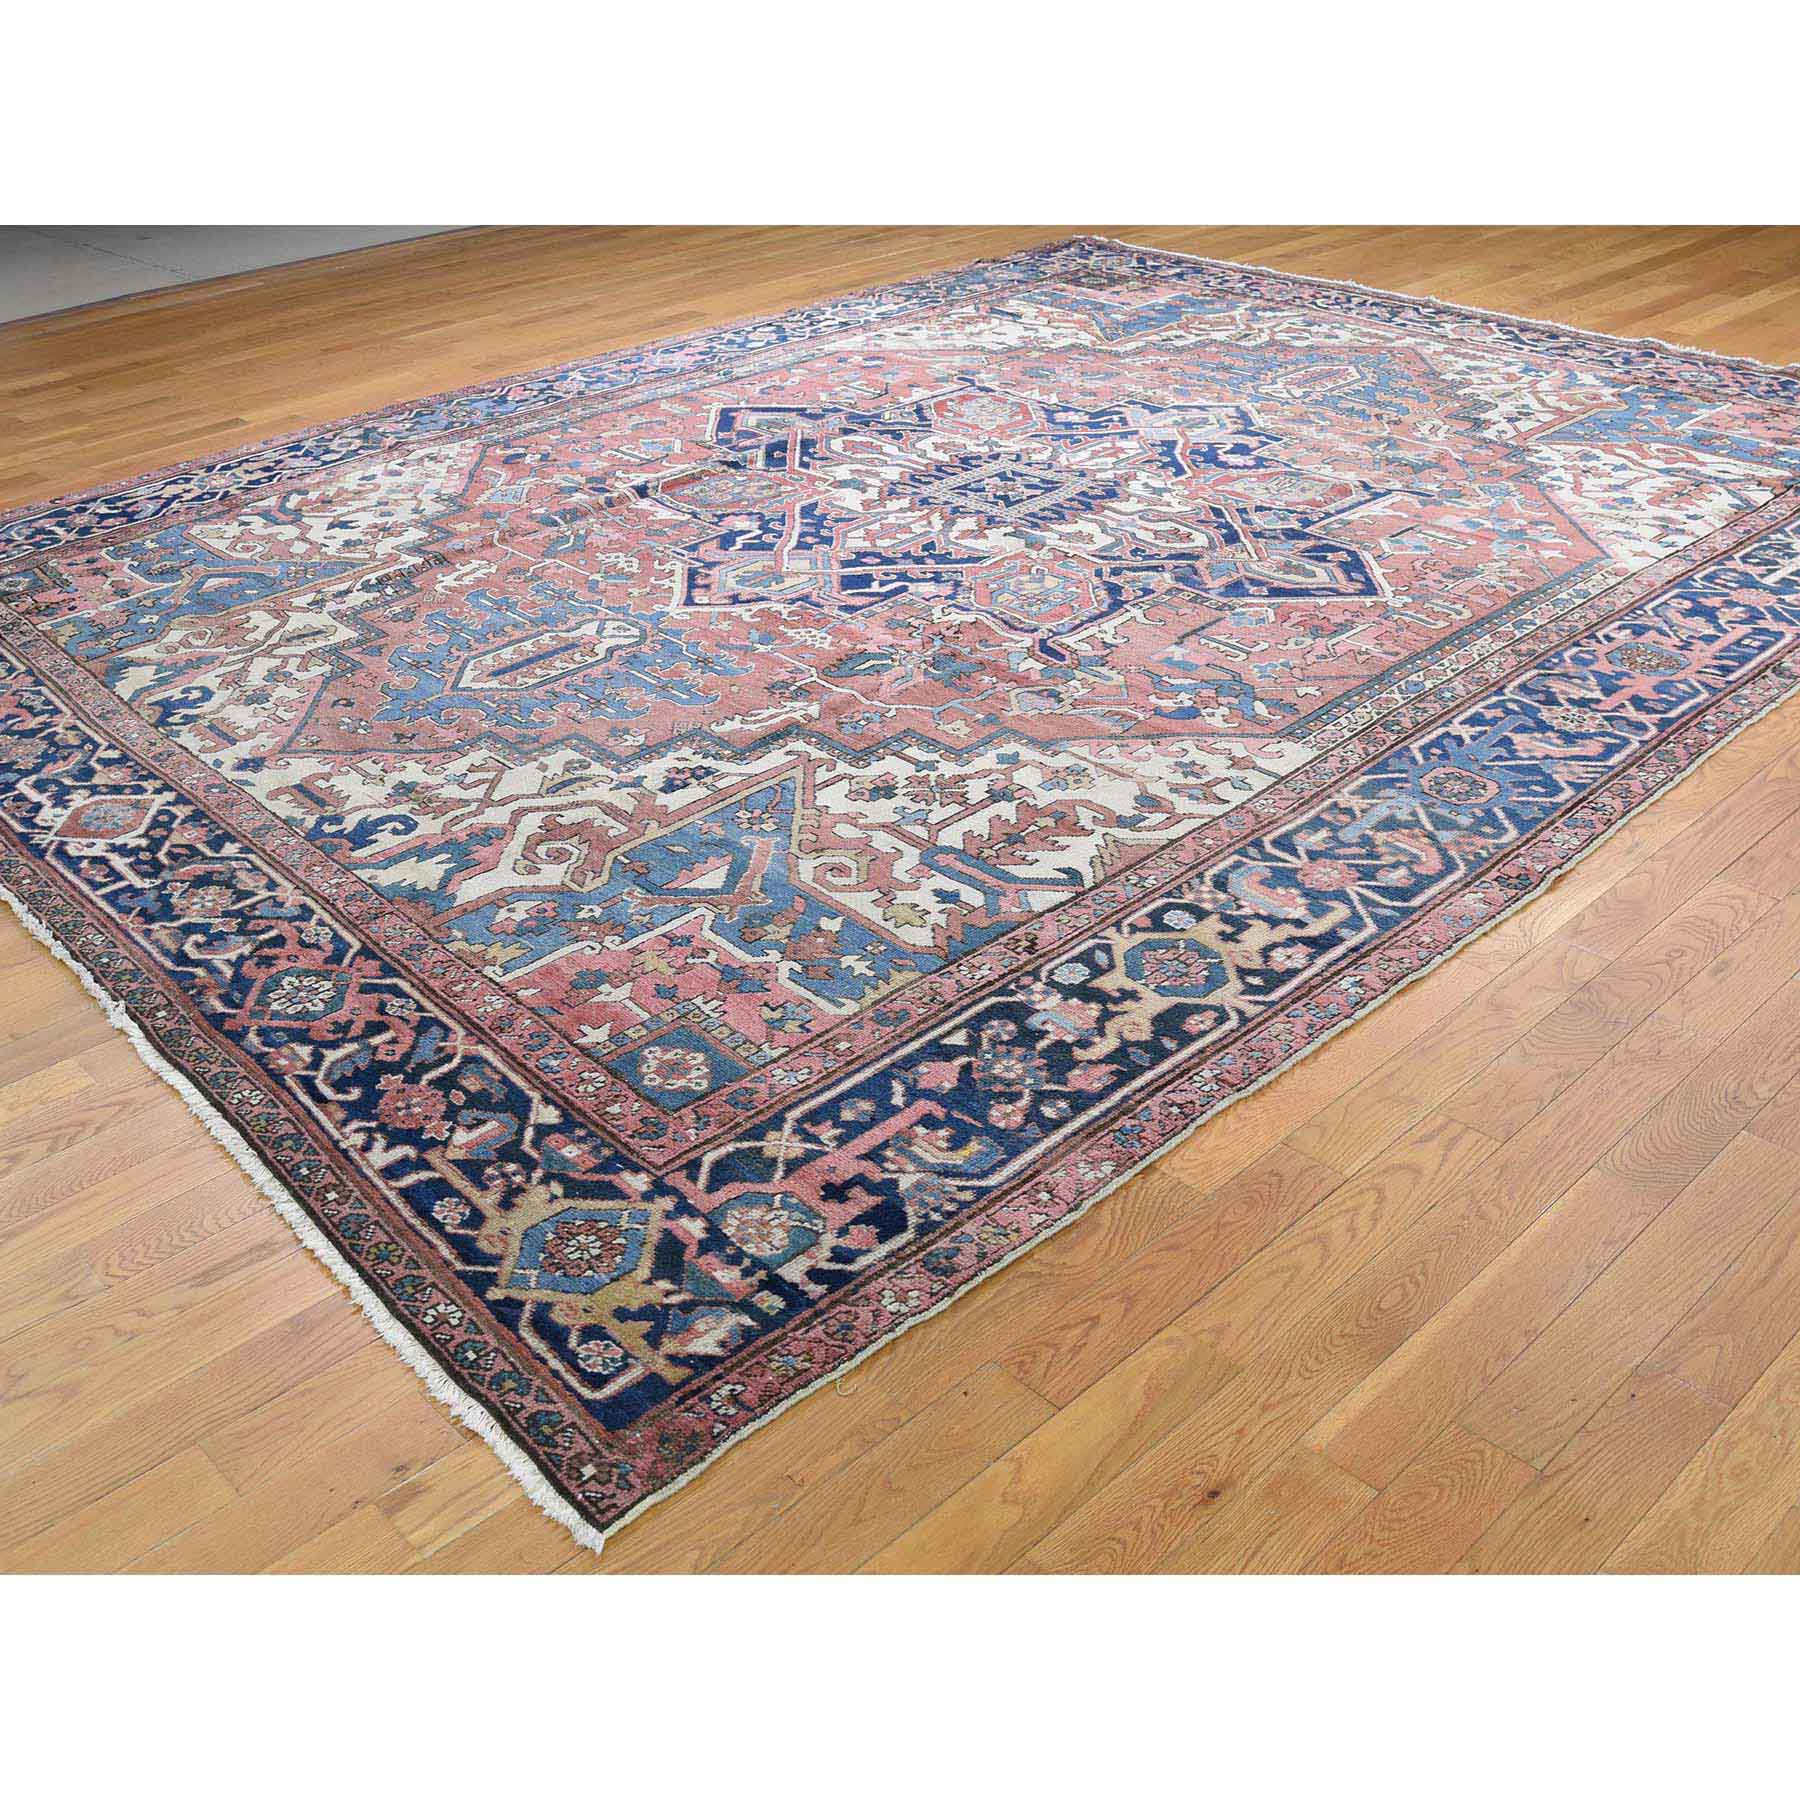 10-1 x12-8  Antique Persian Serapi Exc Cond Pure Wool Hand-Knotted Oriental Rug 